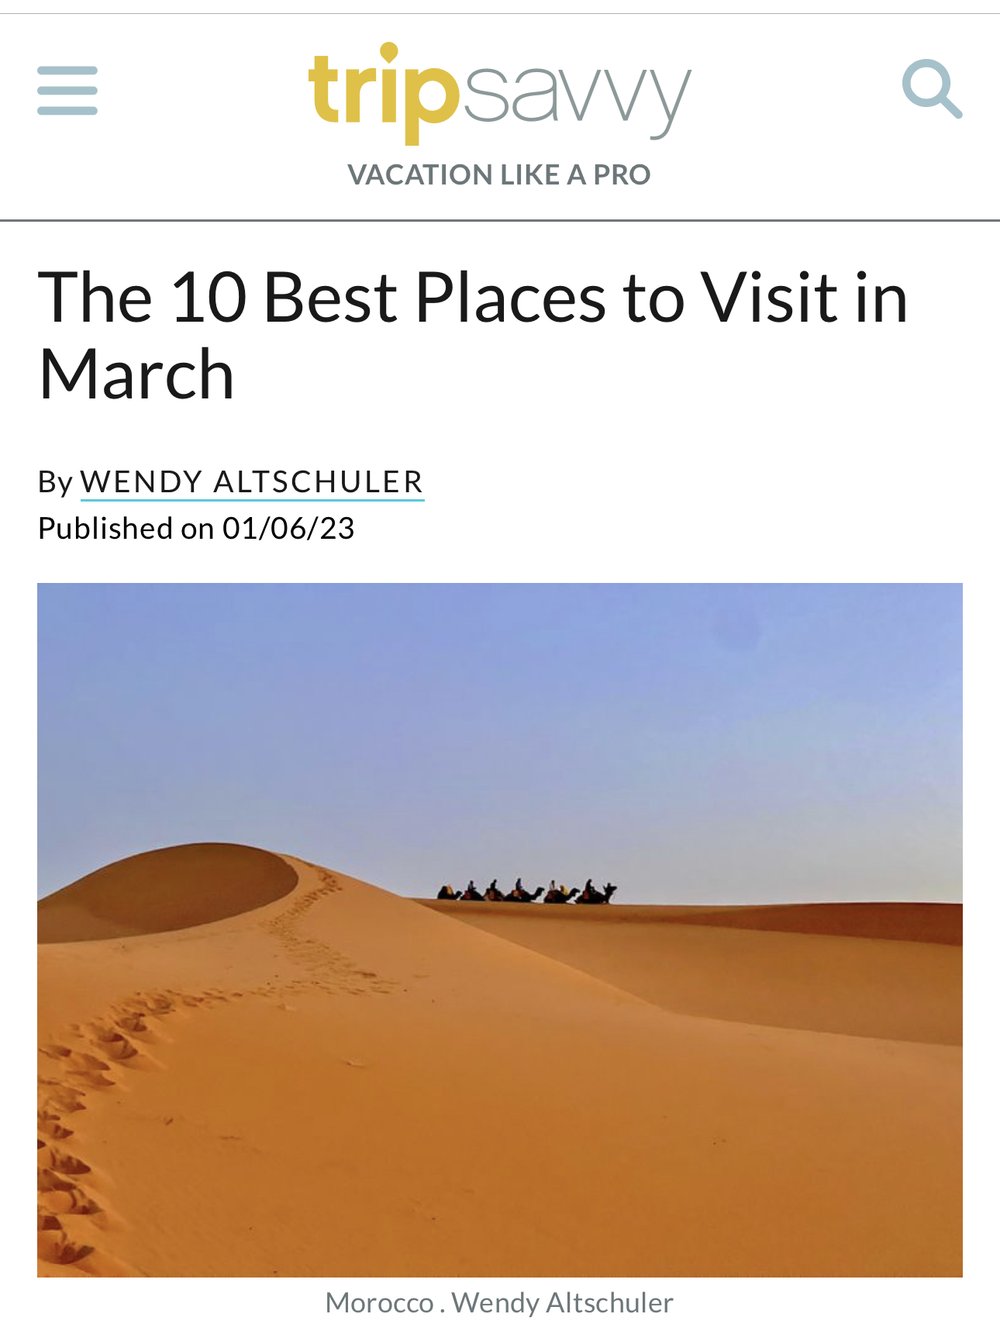 The 10 Best Places to Visit in March